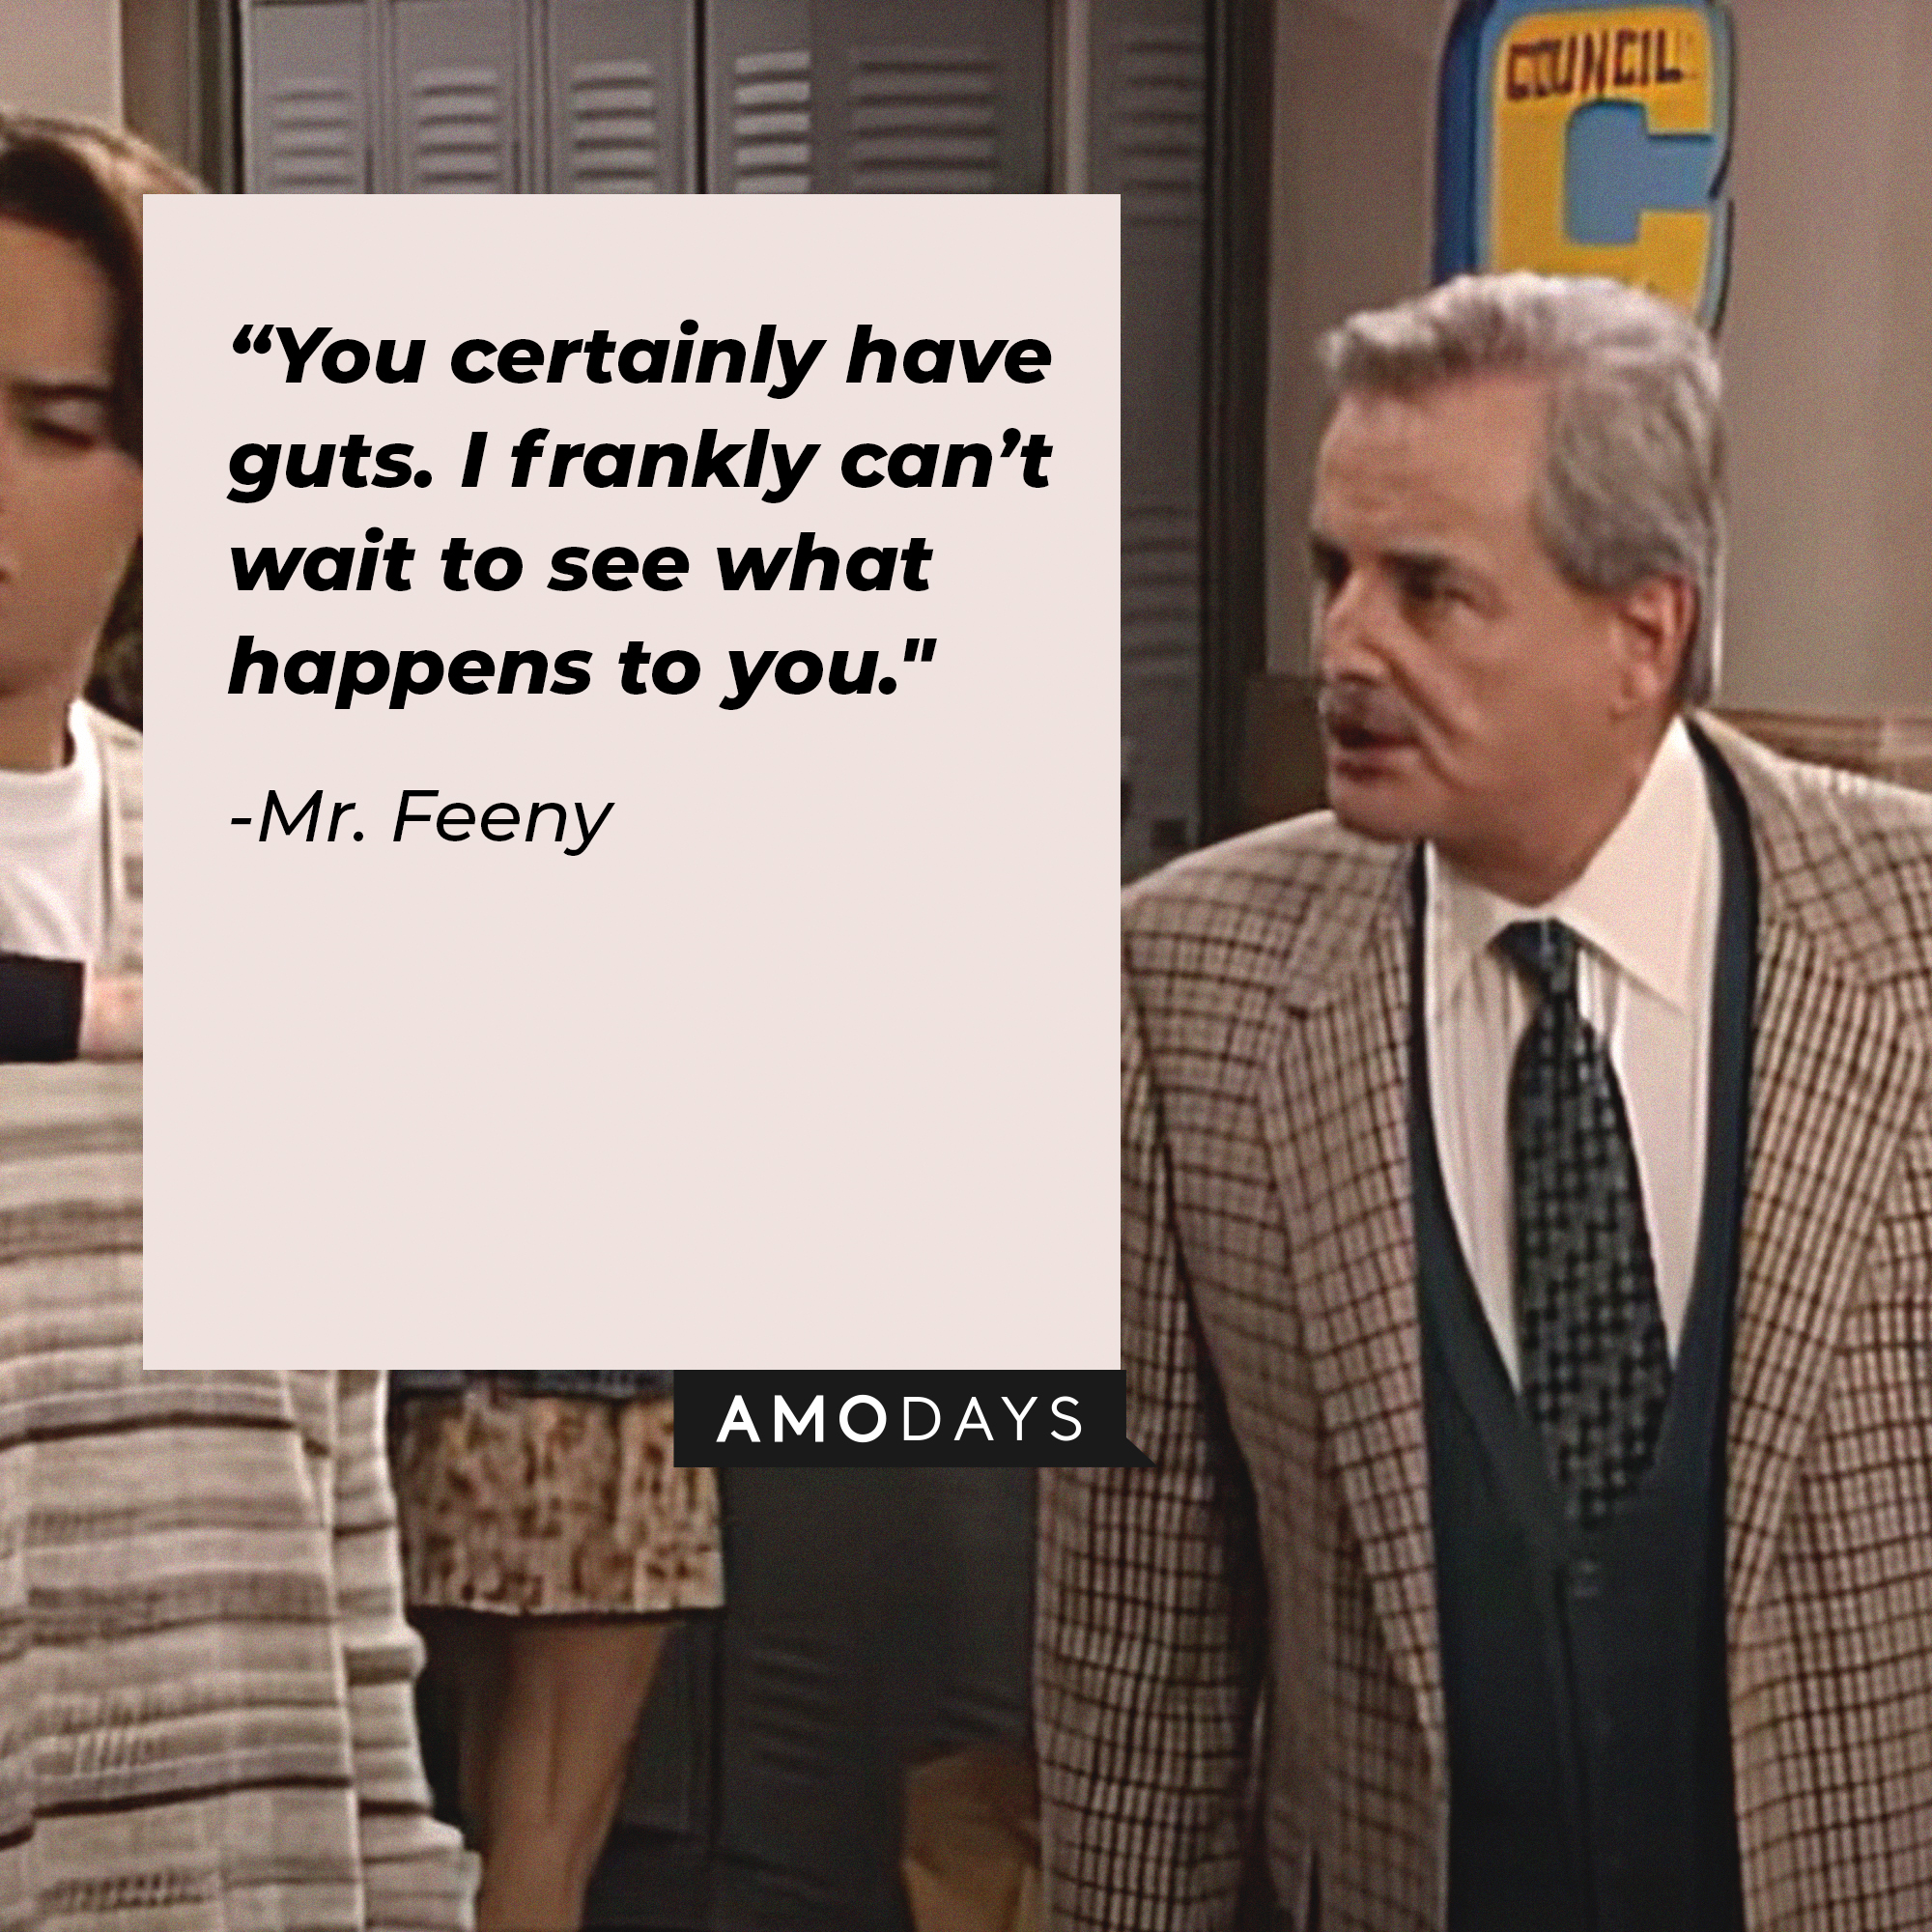 An image of Mr. Feeny with his quote: “You certainly have guts. I frankly can’t wait to see what happens to you." | Source: facebook.com/BoyMeetsWorldSeries